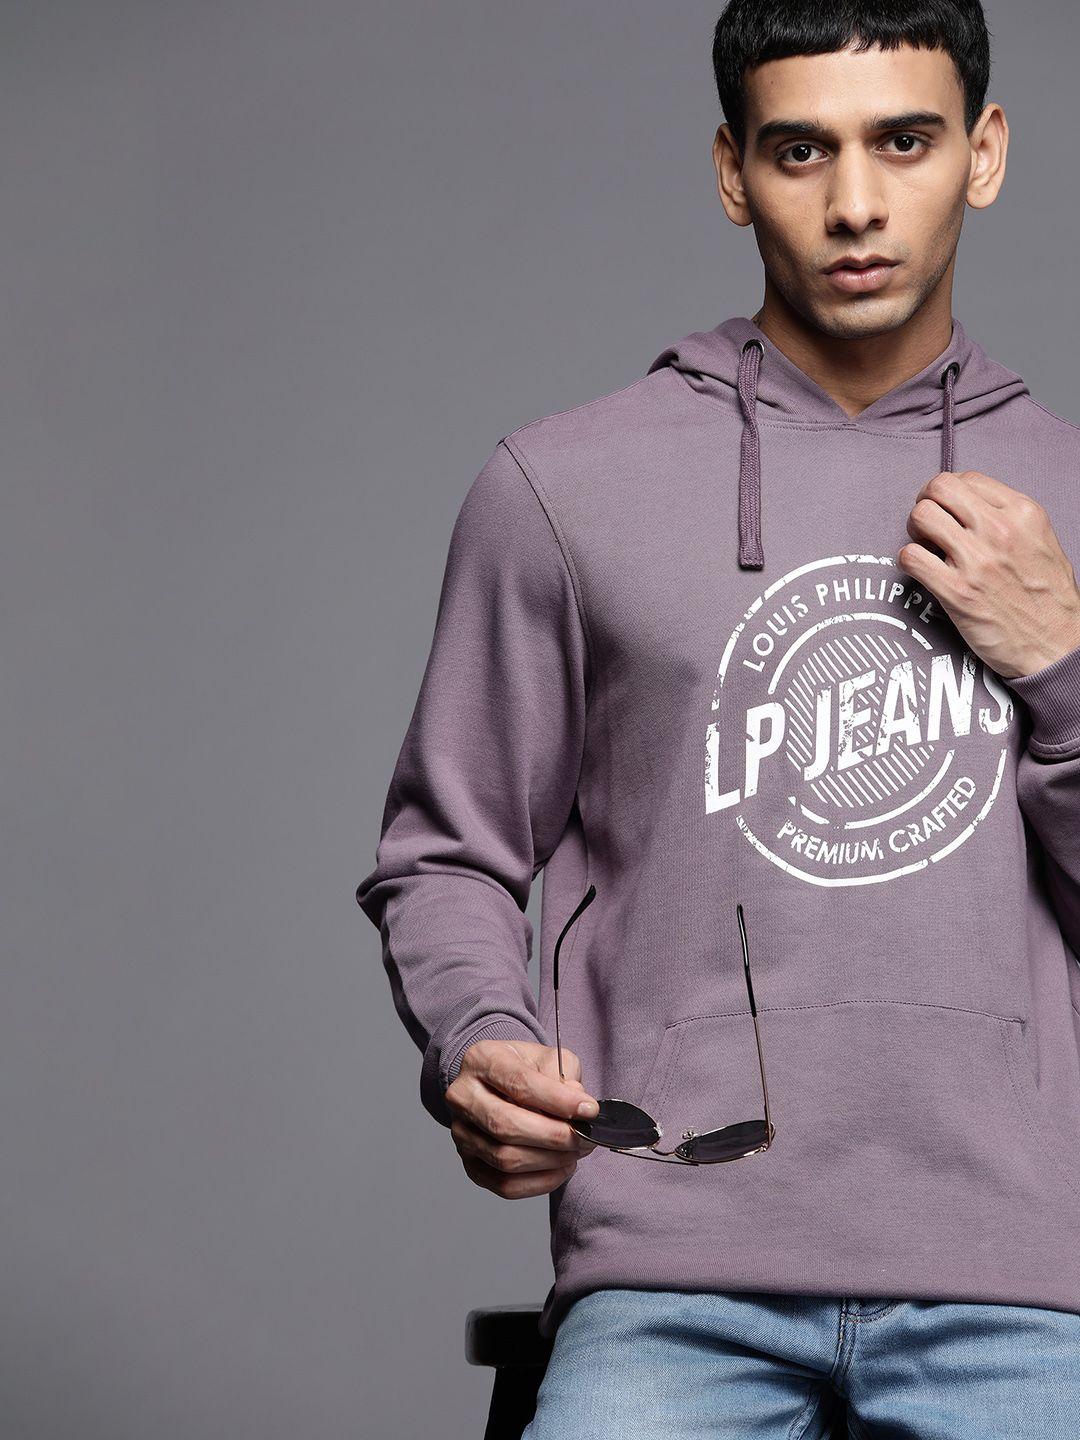 louis-philippe-jeans-men-lilac-&-white-printed-pure-cotton-hooded-sweatshirt